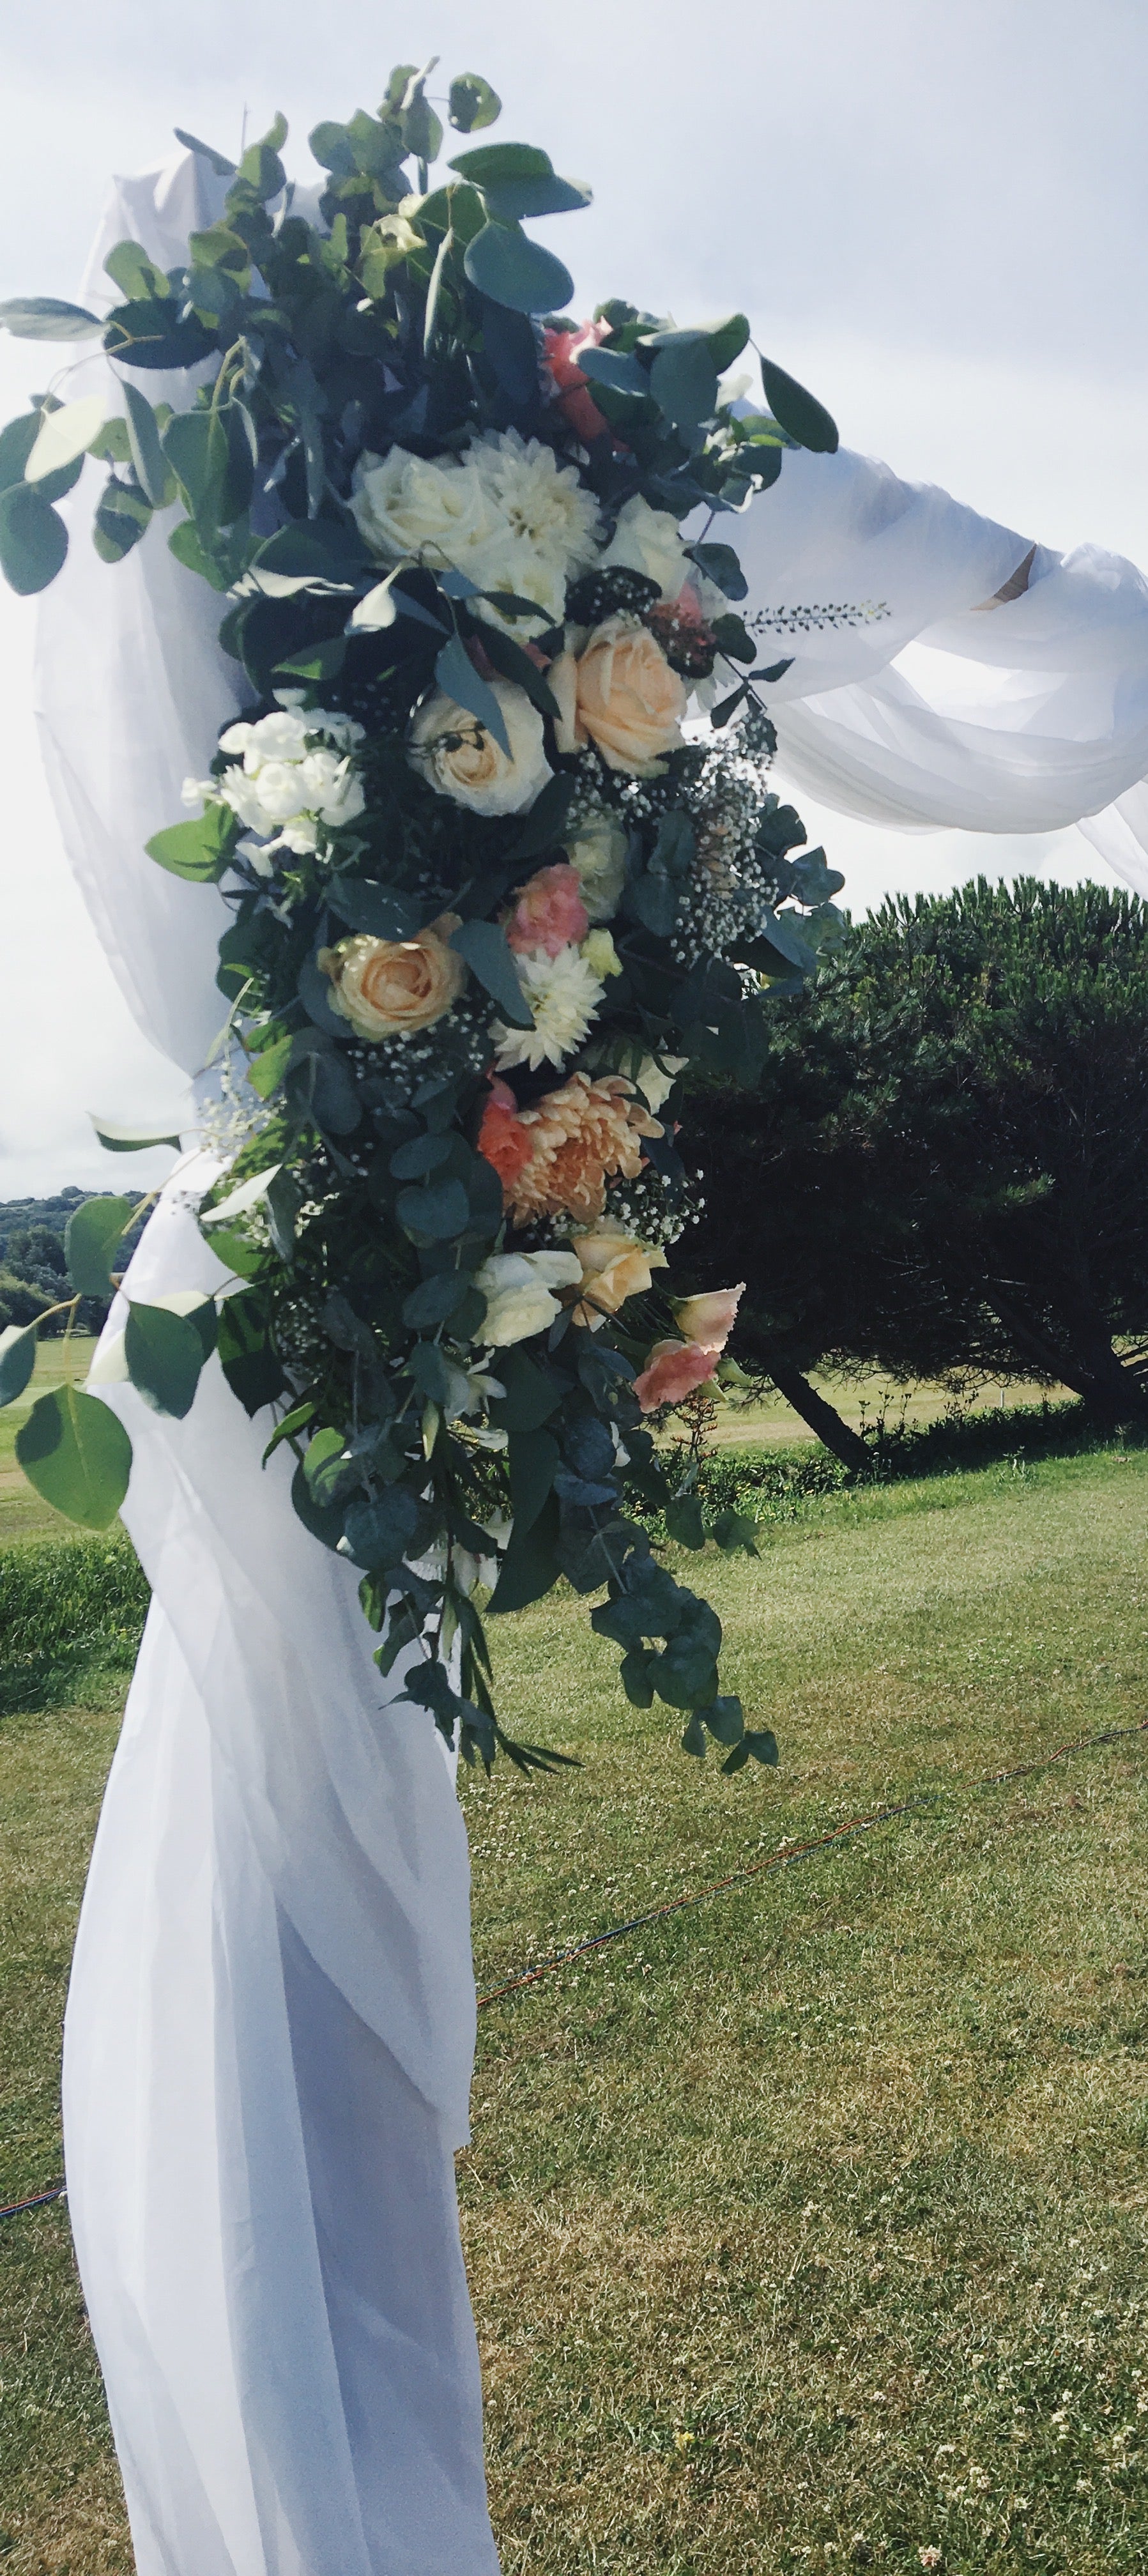 tigerlily florist guernsey flowers delivery wedding arch flower bunches